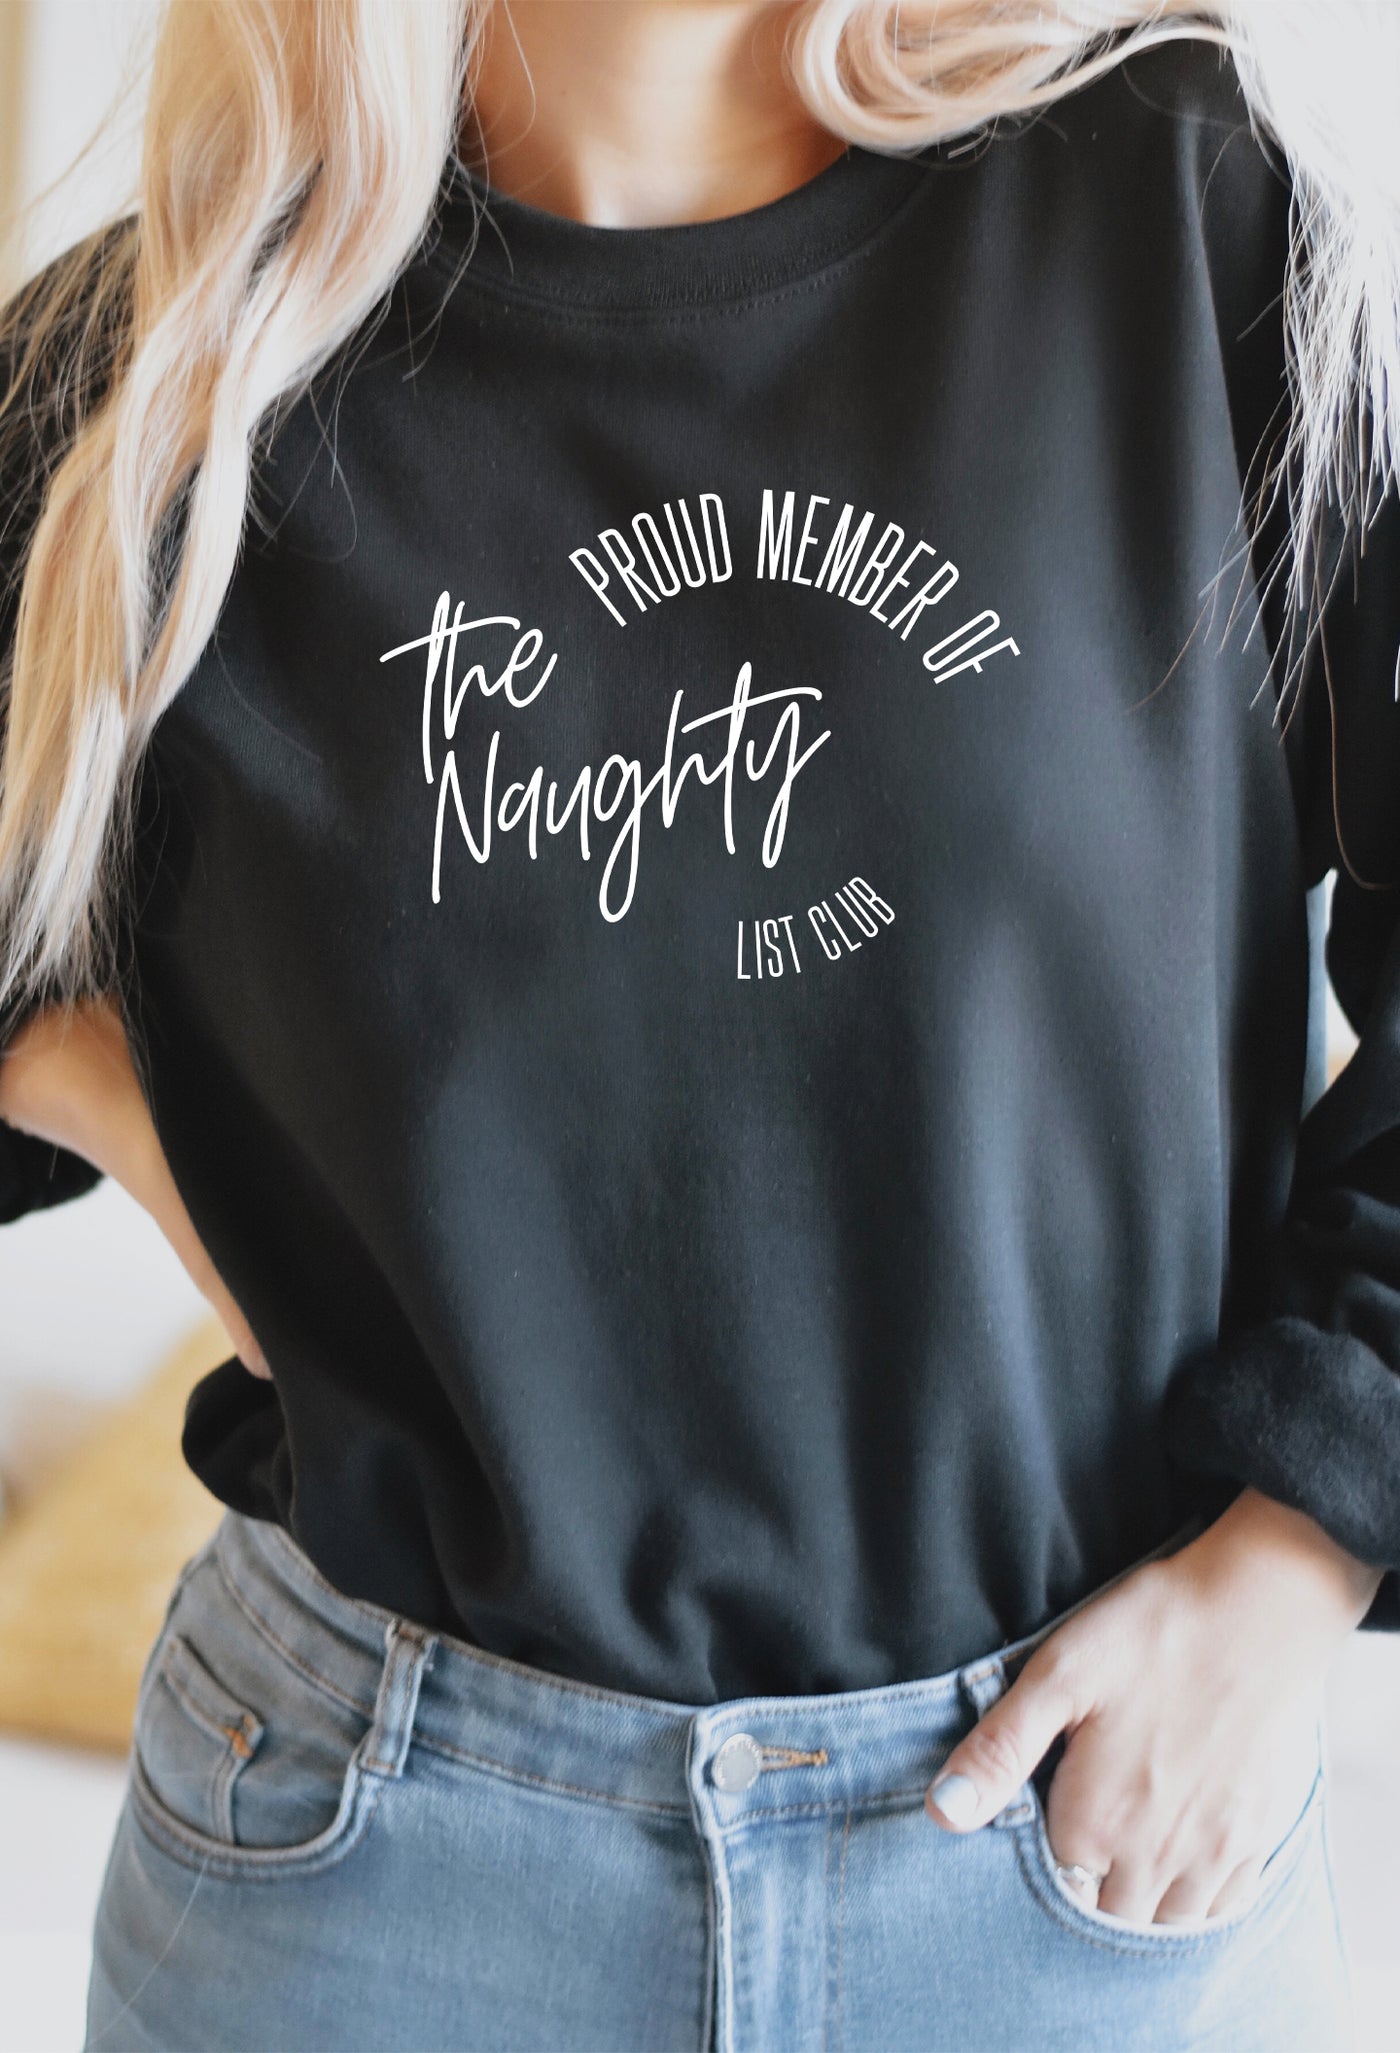 Proud Member Of The Naughty List Club Sweater